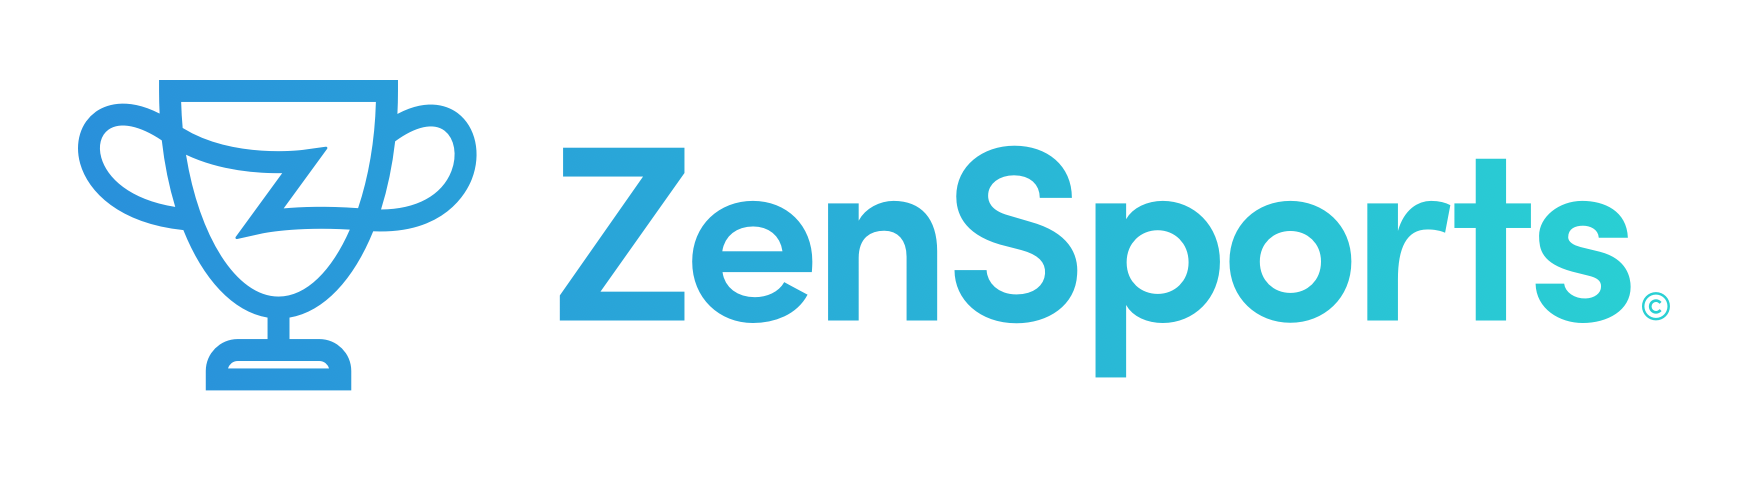 Featured Image for ZenSports, Inc.